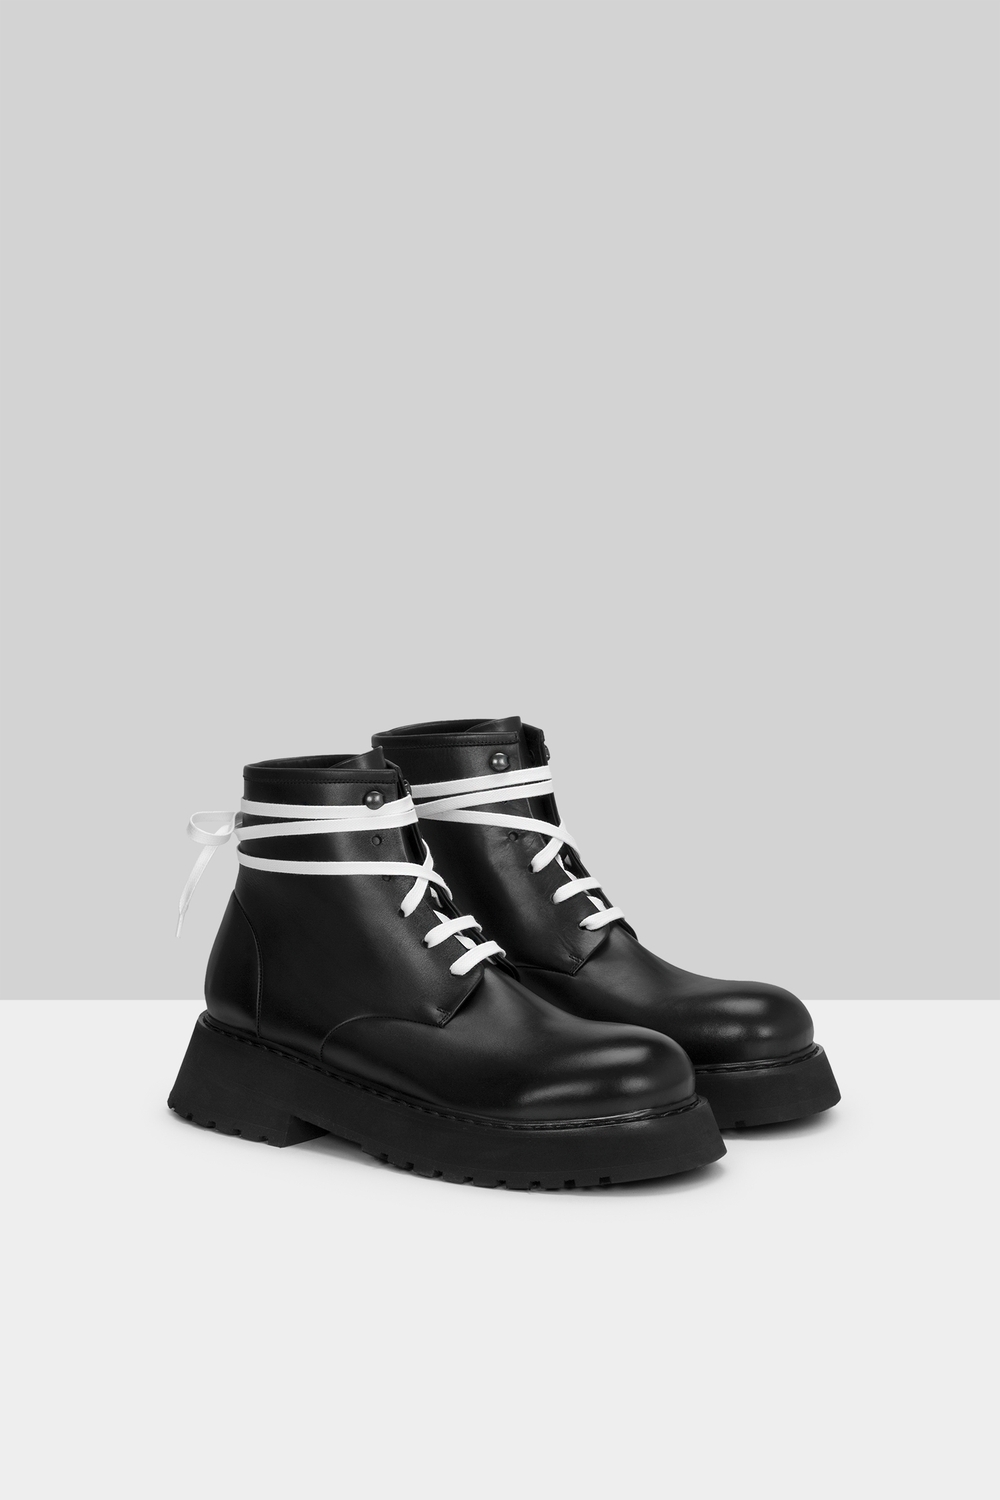 Micarro Lace Up Ankle Boot Black hover